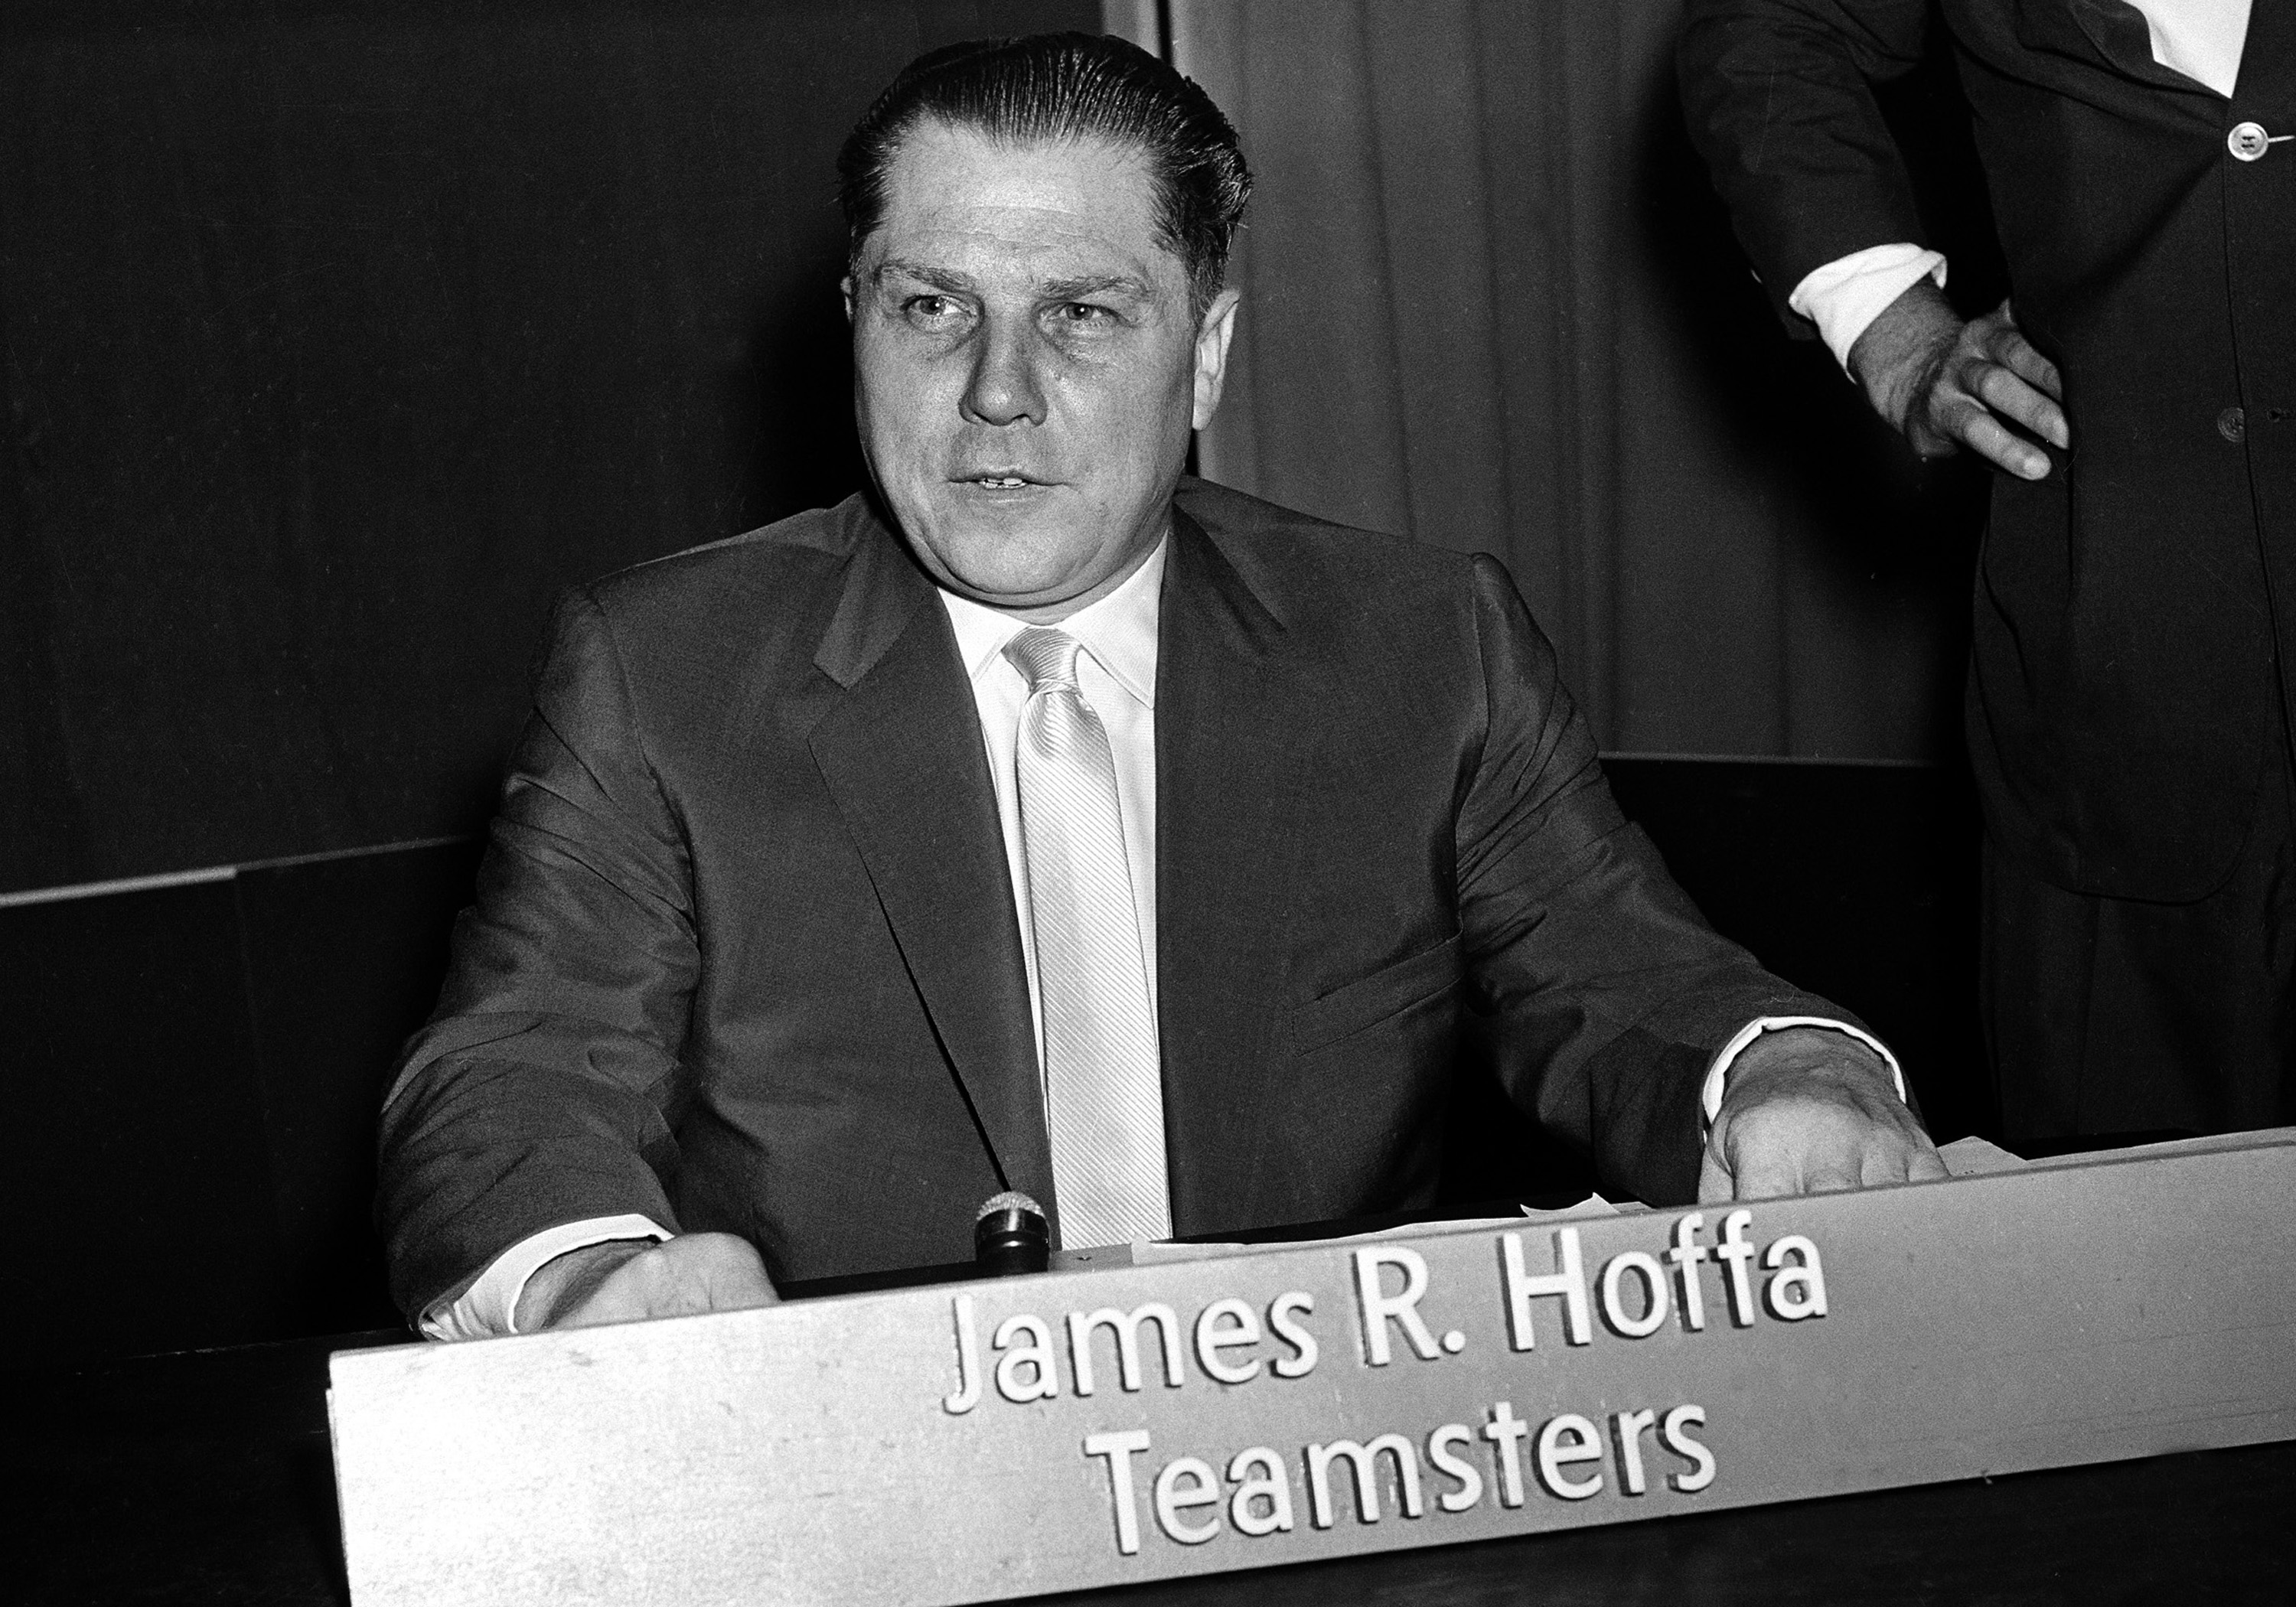 Teamsters Union Jimmy Hoffa using telephone in his chauffeured car 1959 Photo Pres